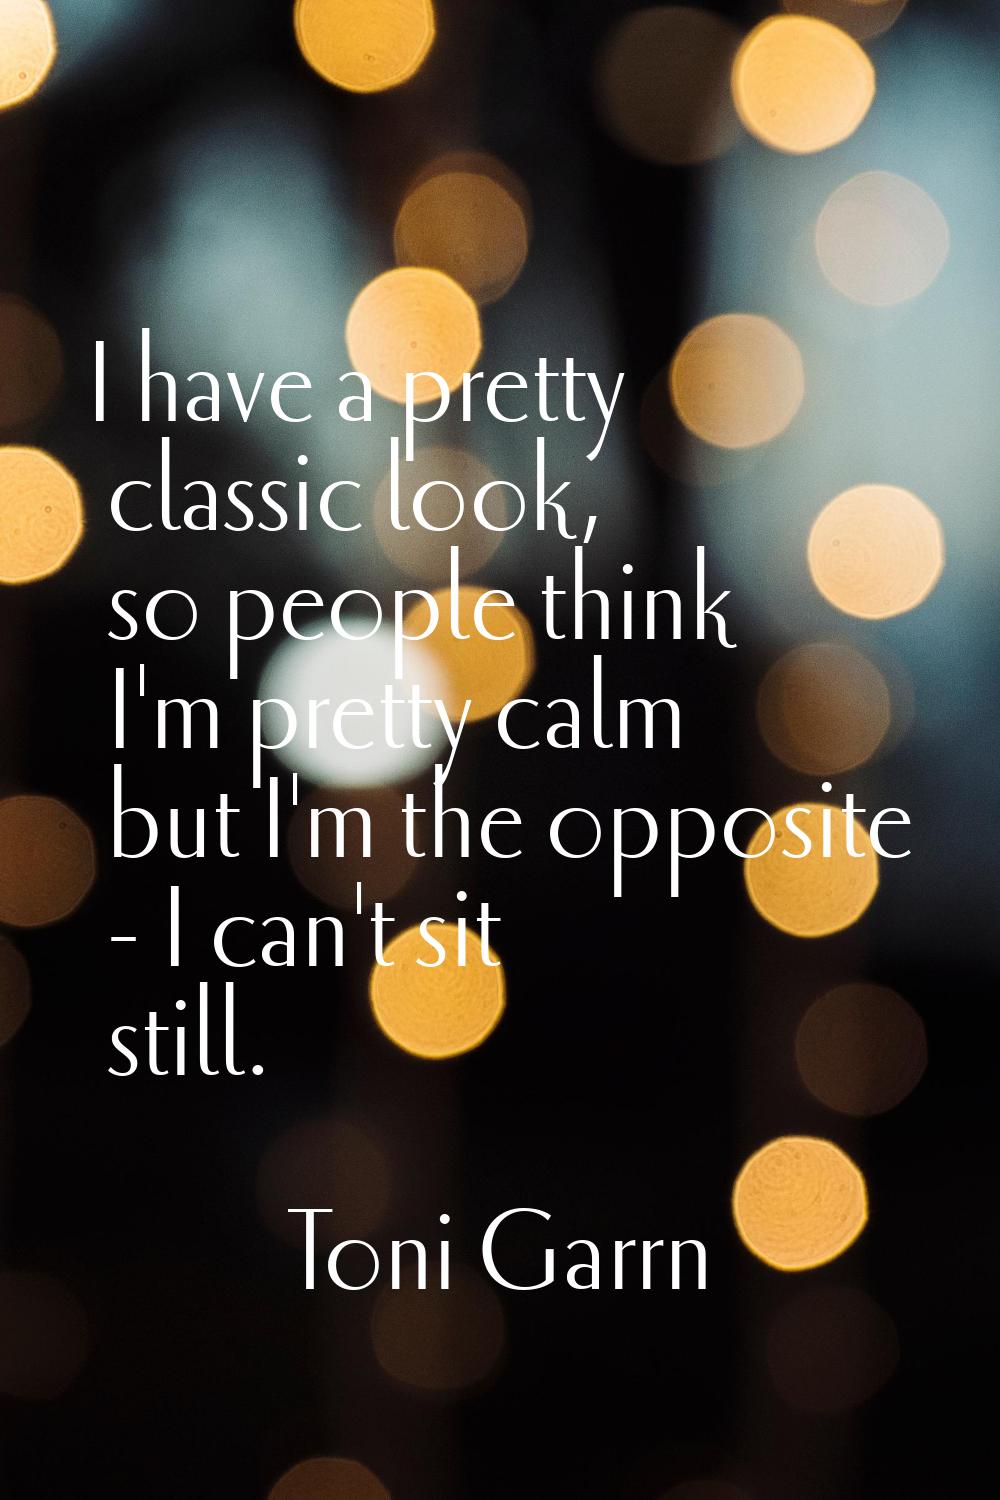 I have a pretty classic look, so people think I'm pretty calm but I'm the opposite - I can't sit st